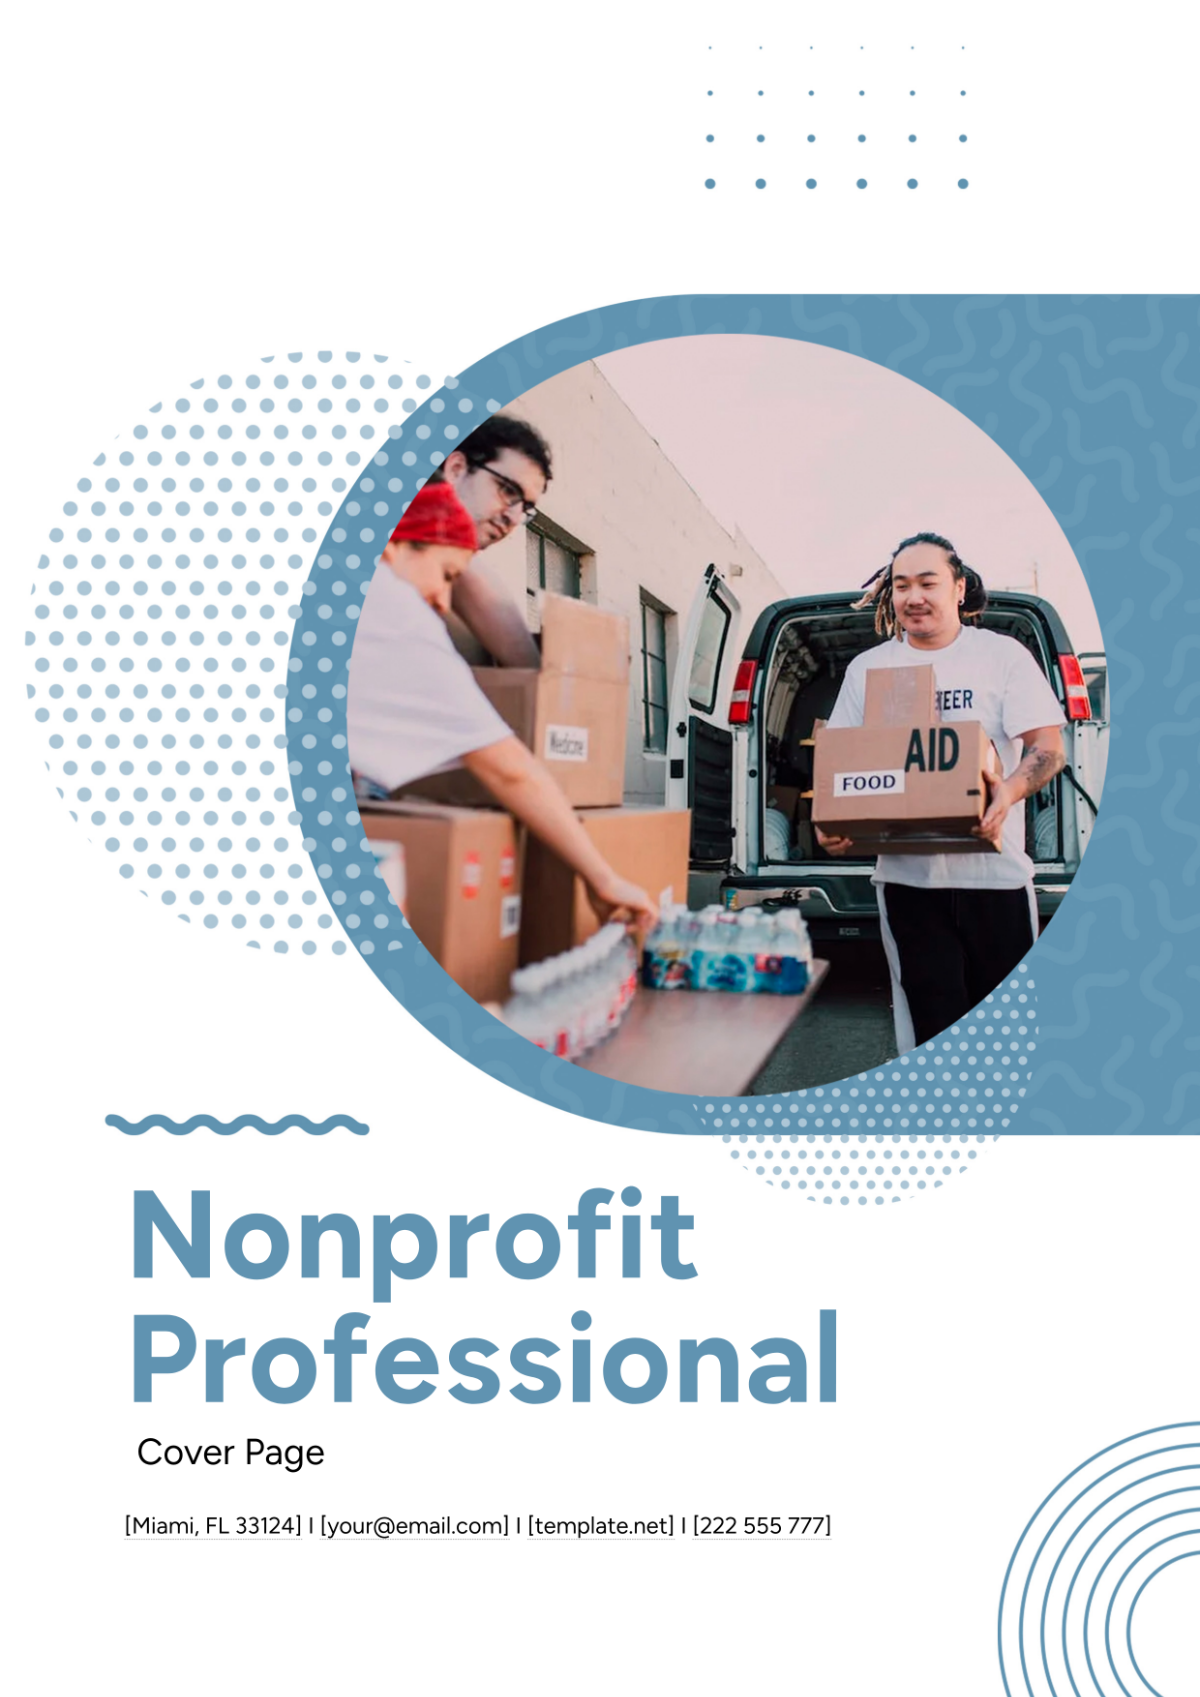 Nonprofit Professional Cover Page Template